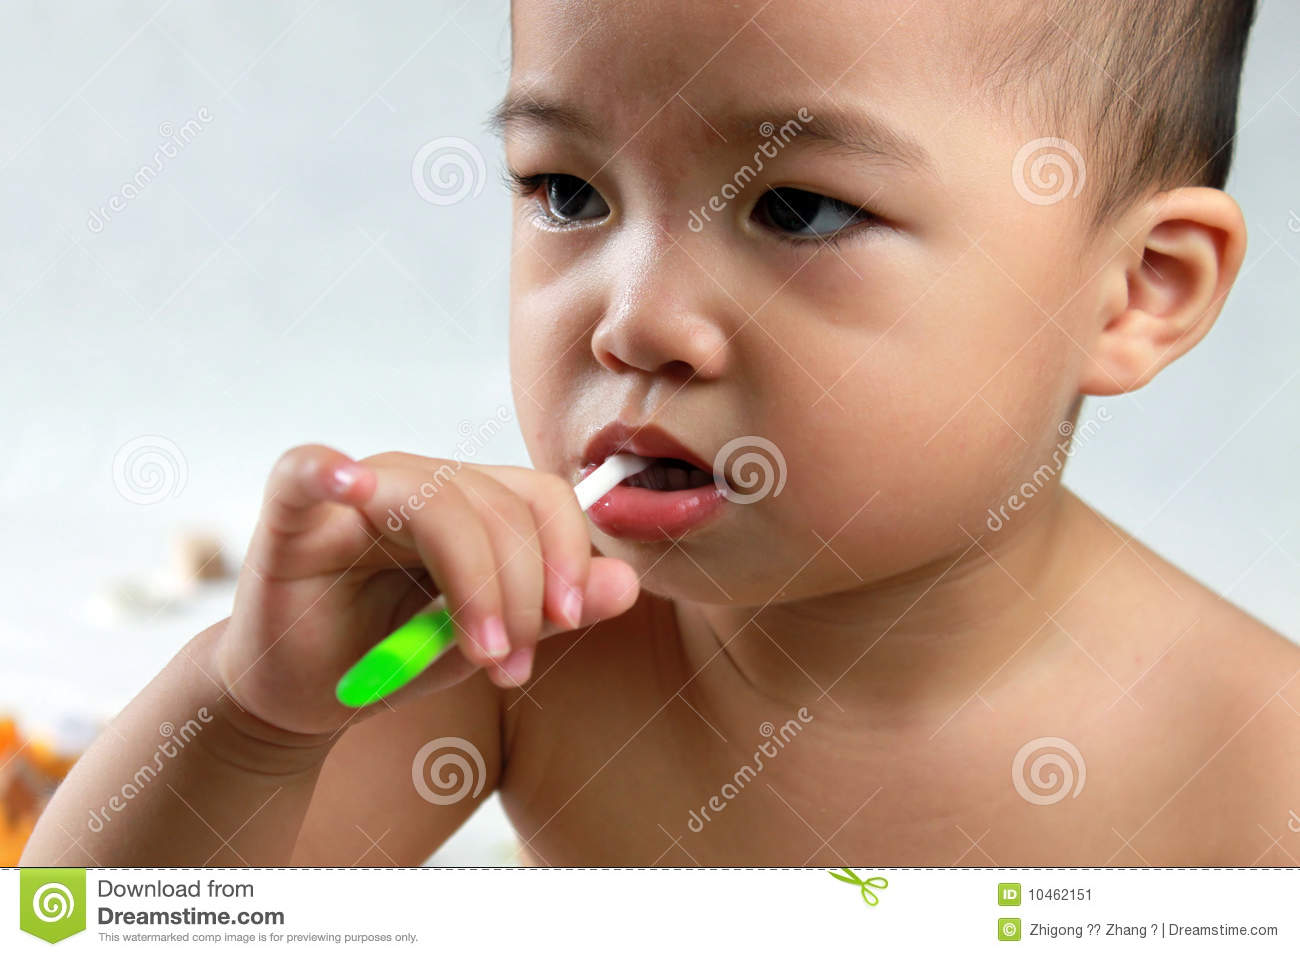 Year Old Asian Baby Brushing Teeth With A Green Toothbrushstaring